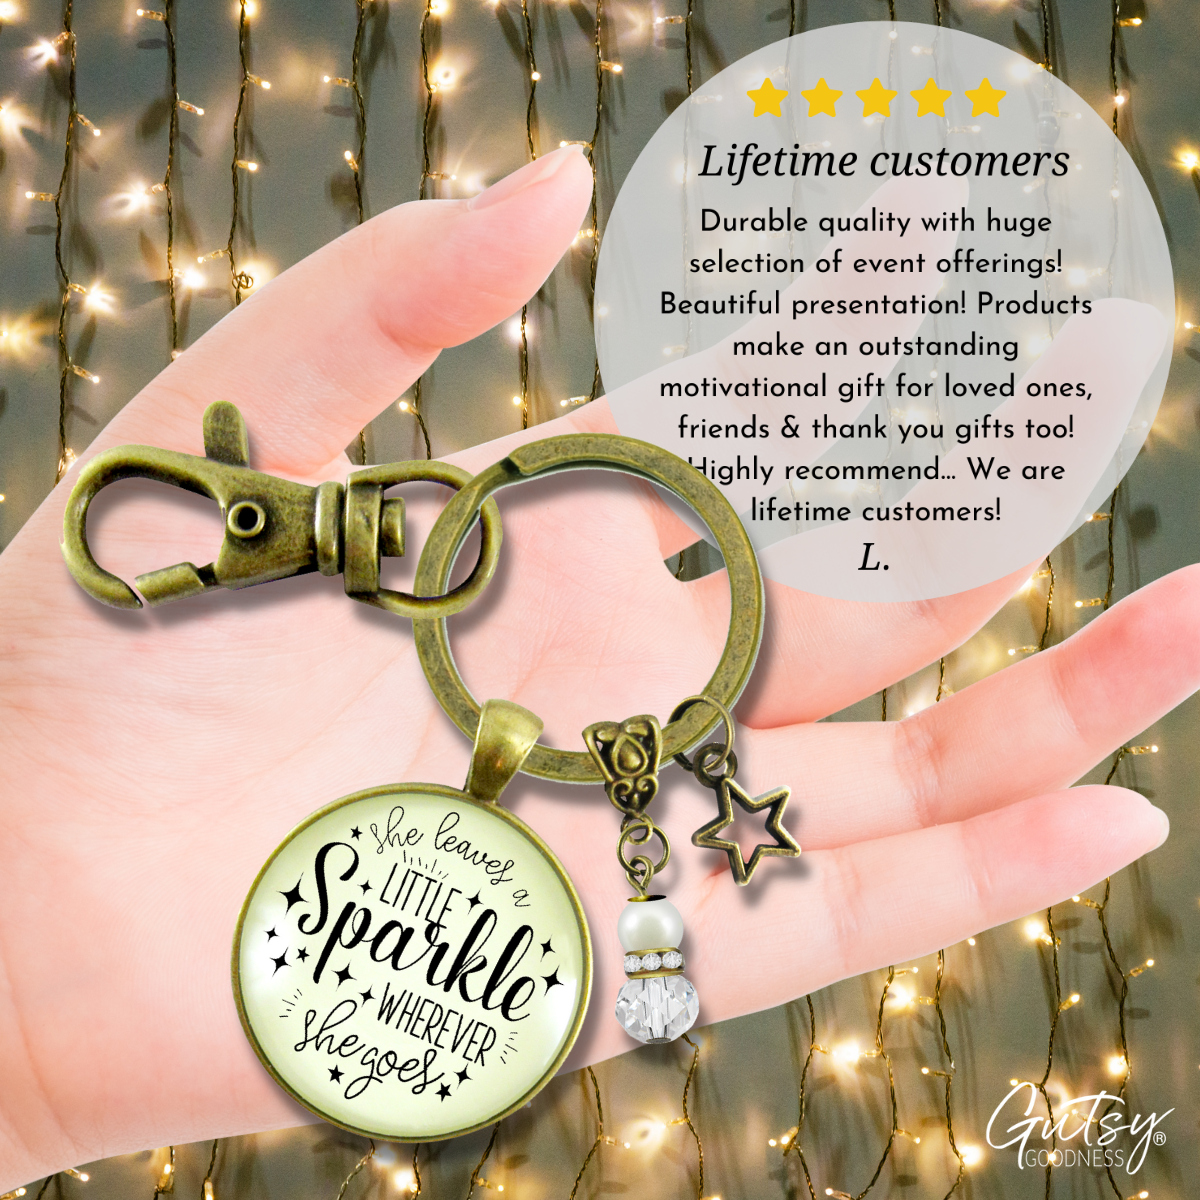 She Leaves a Little Sparkle Glam Quote Keychain Life Jewelry Gift Star Charm - Gutsy Goodness Handmade Jewelry;She Leaves A Little Sparkle Glam Quote Keychain Life Jewelry Gift Star Charm - Gutsy Goodness Handmade Jewelry Gifts